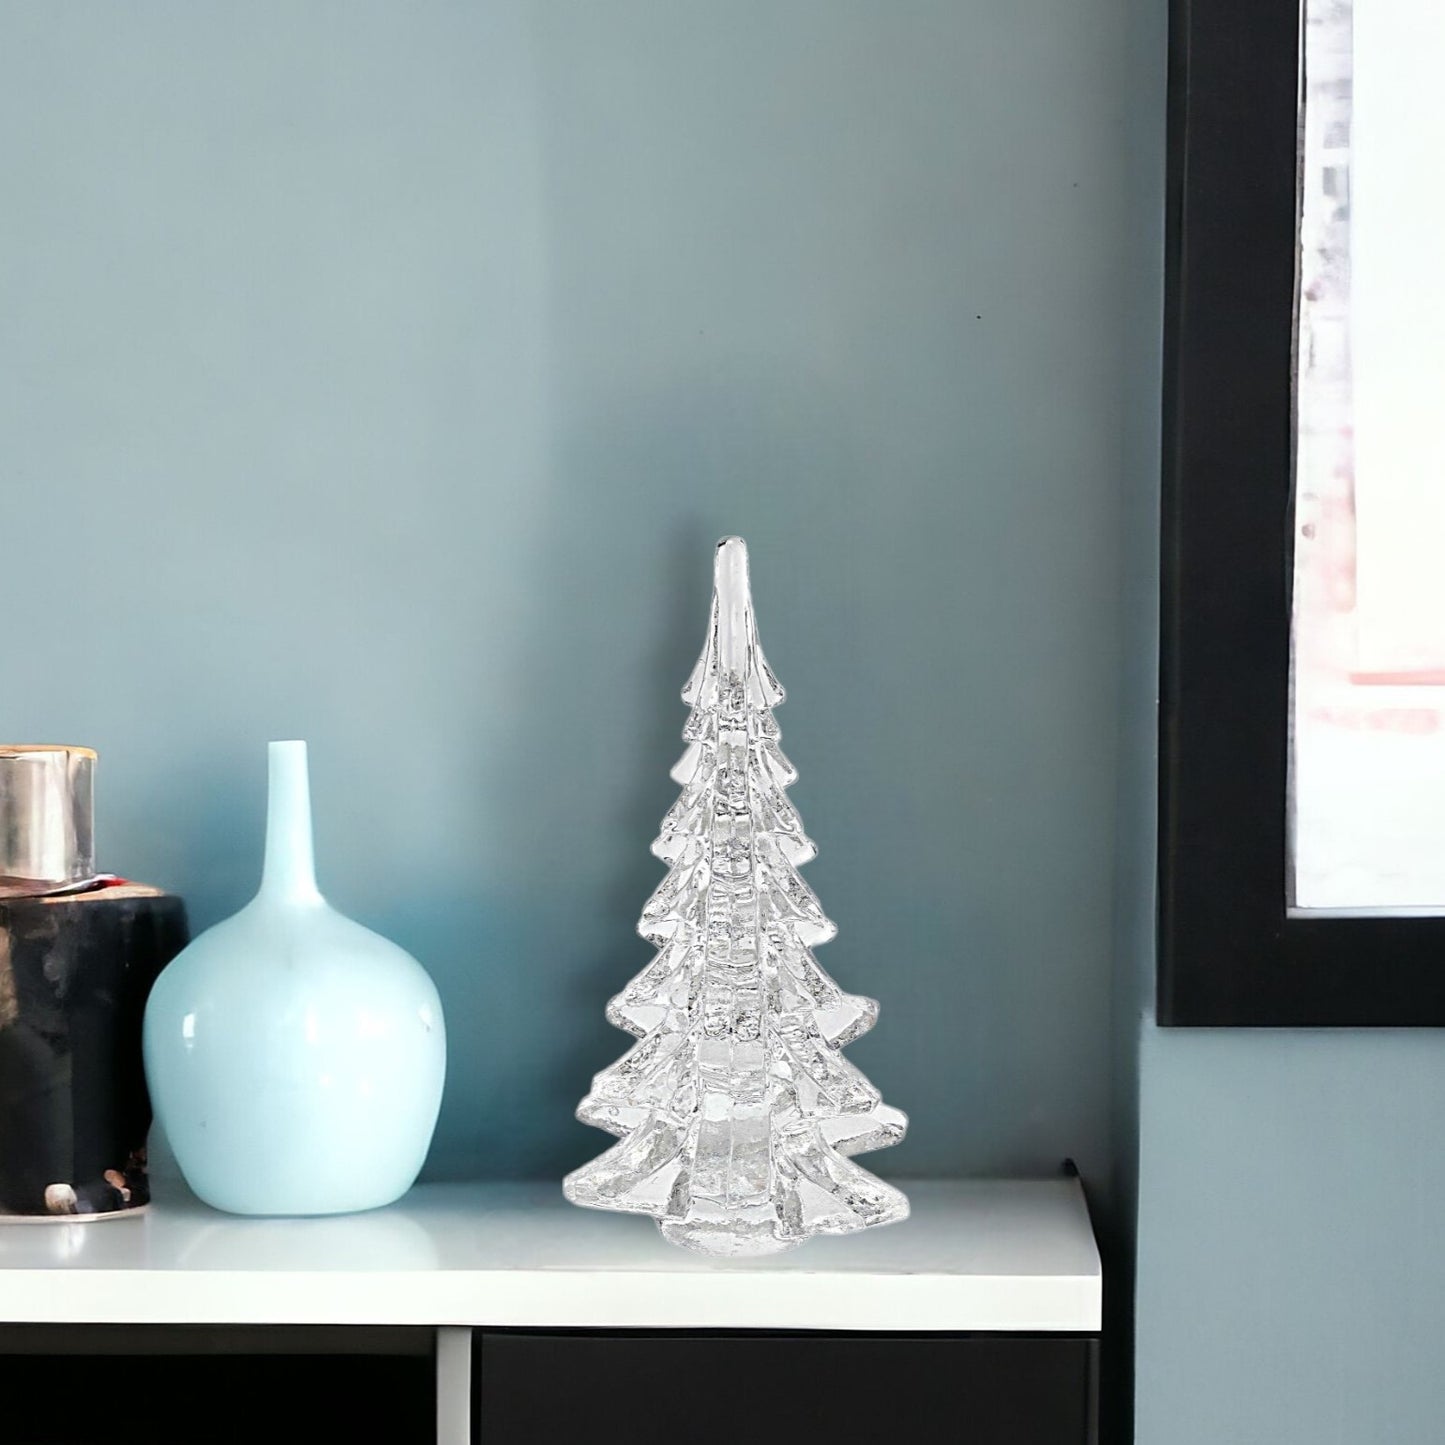 10" Mouth Blown Clear Glass Christmas Tree Sculpture